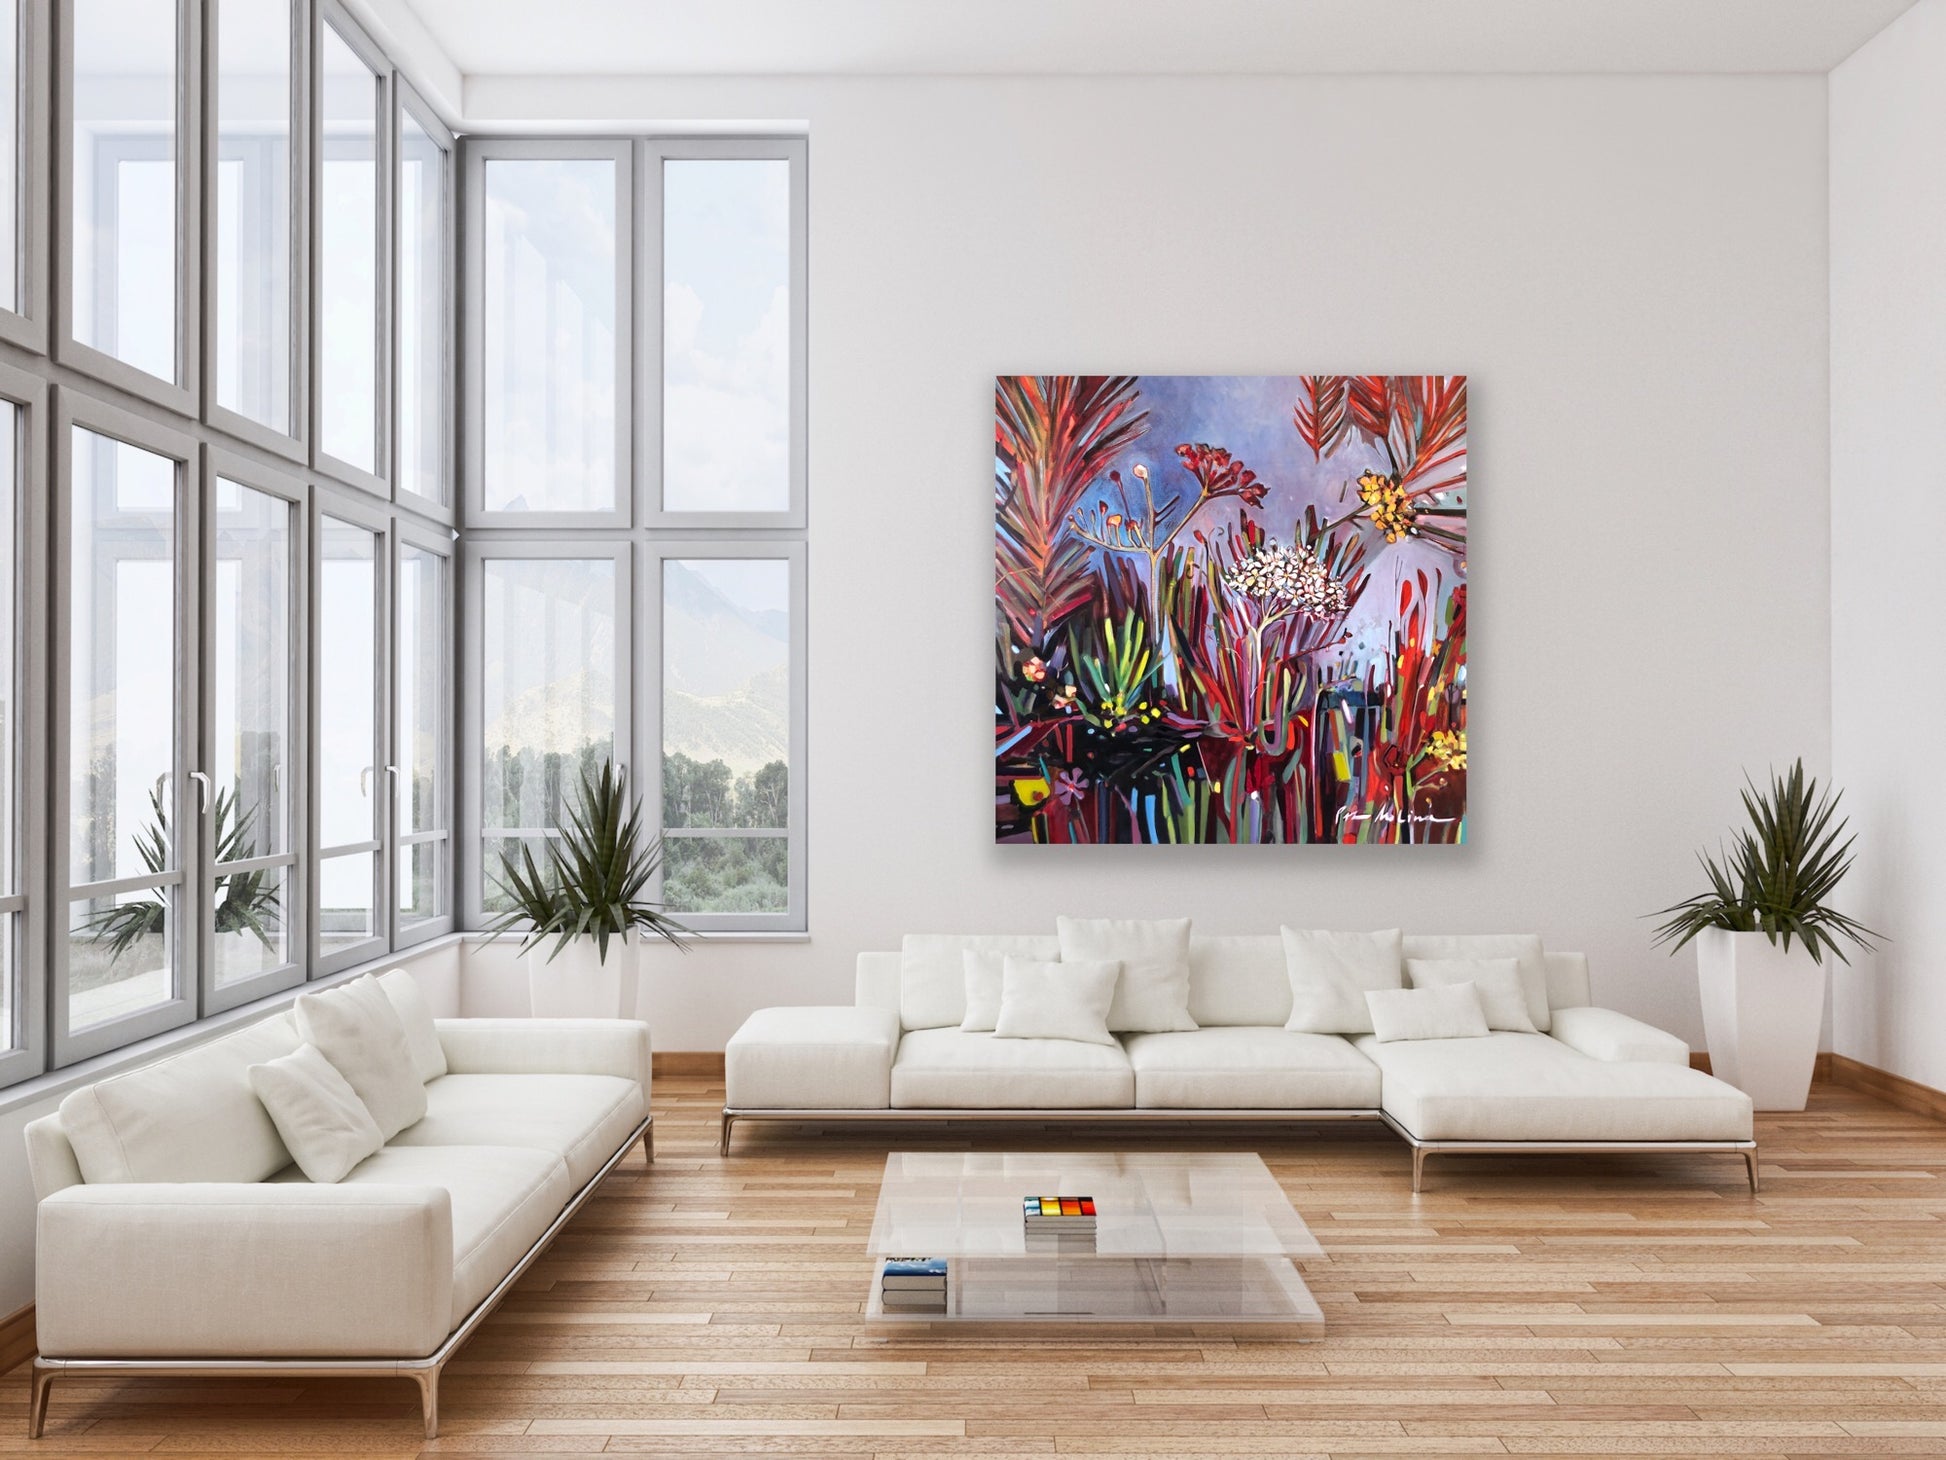 Grand Vibrant Floral Painting. Thick, Colorful Brushstrokes that burst open. Painting in a styled living room.